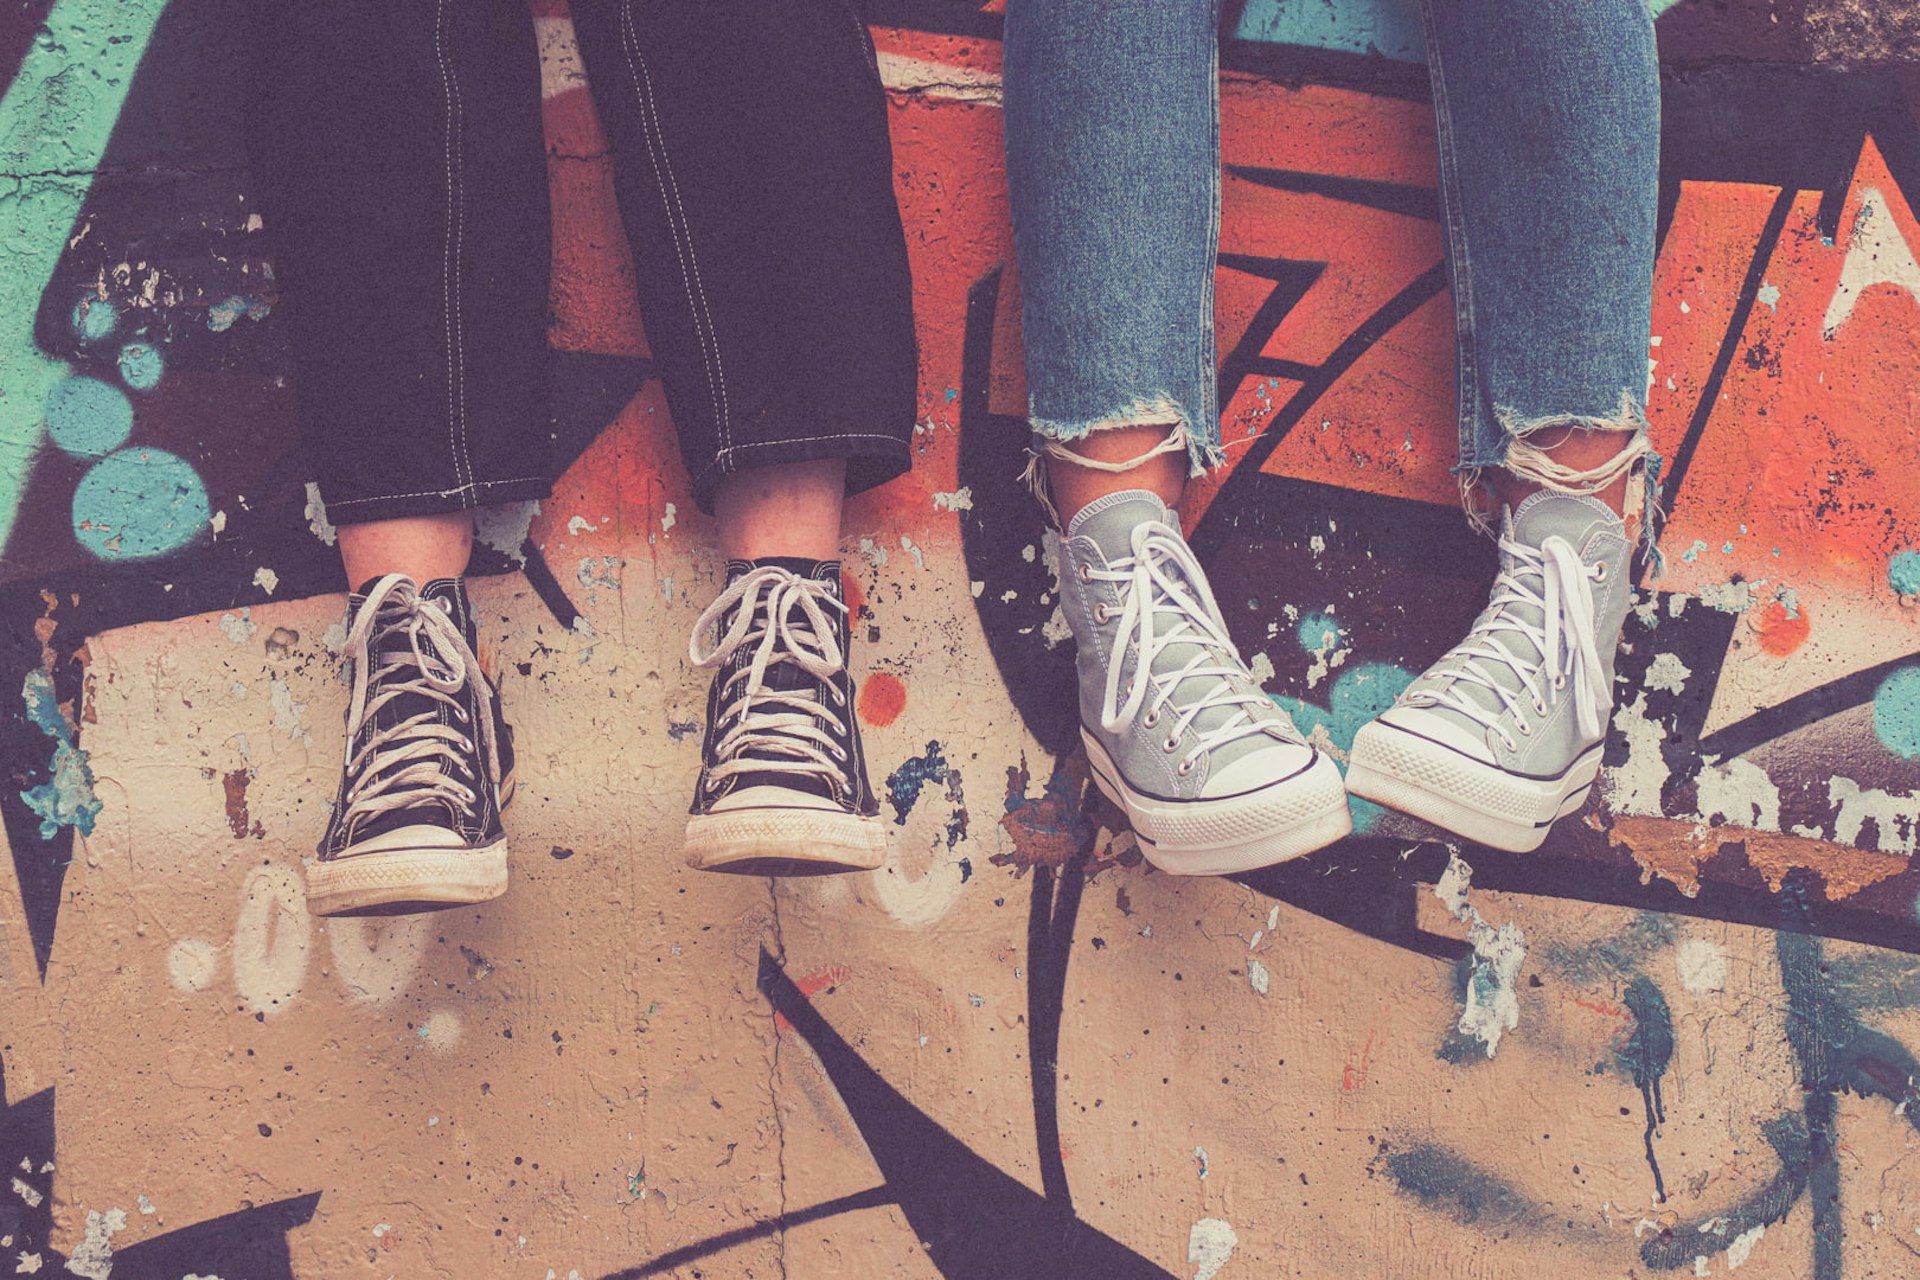 Two pairs of feet wearing Converse sneakers are dangling against a graffiti-covered wall.